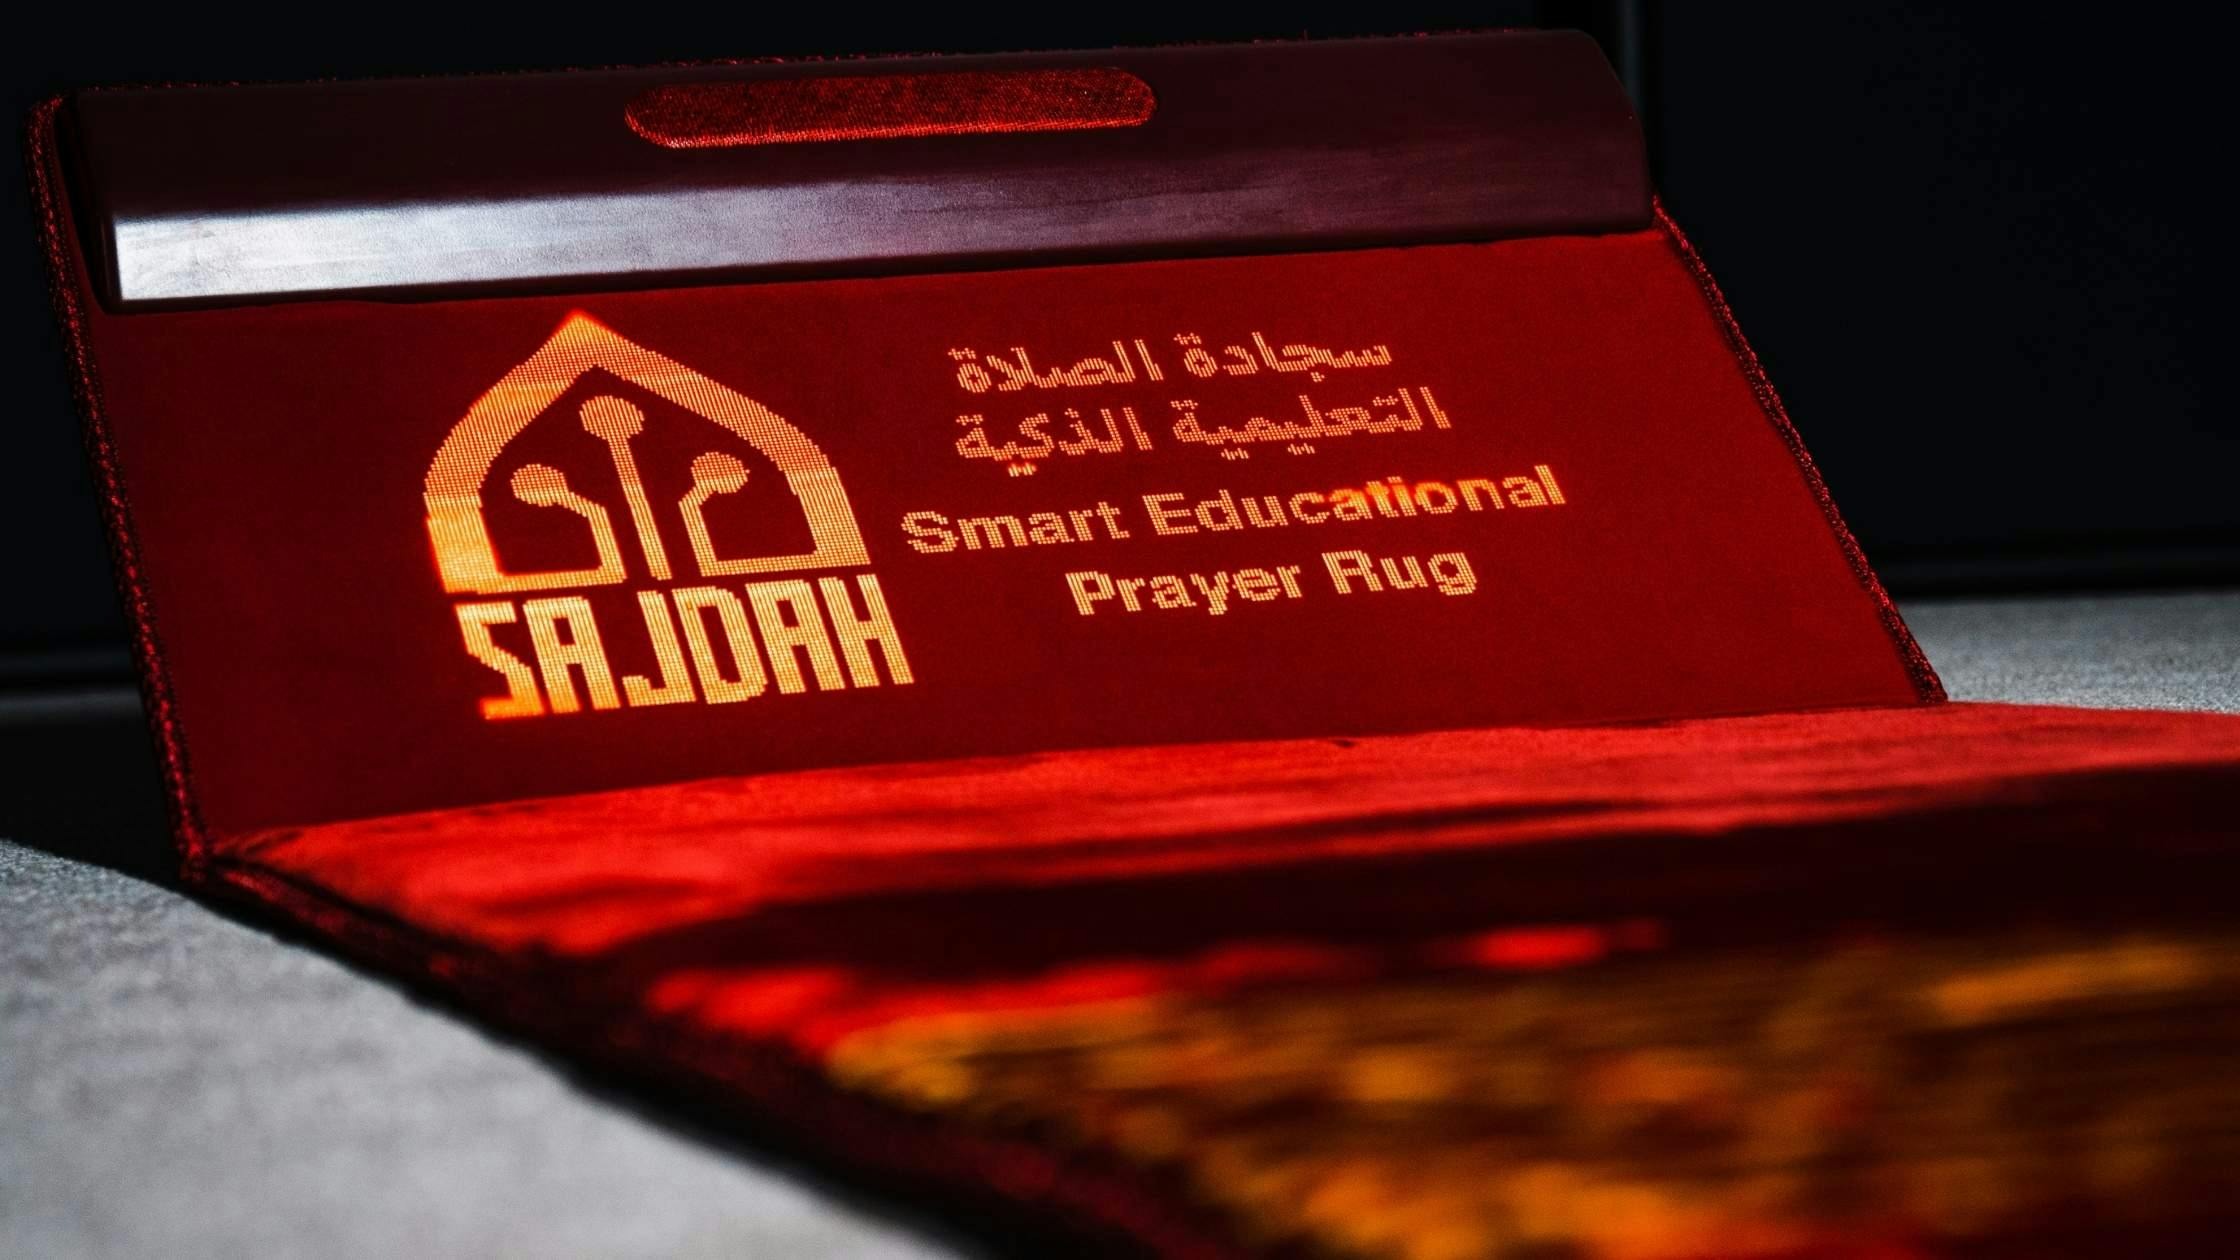 World’s First Smart Educational Prayer Rug and You 